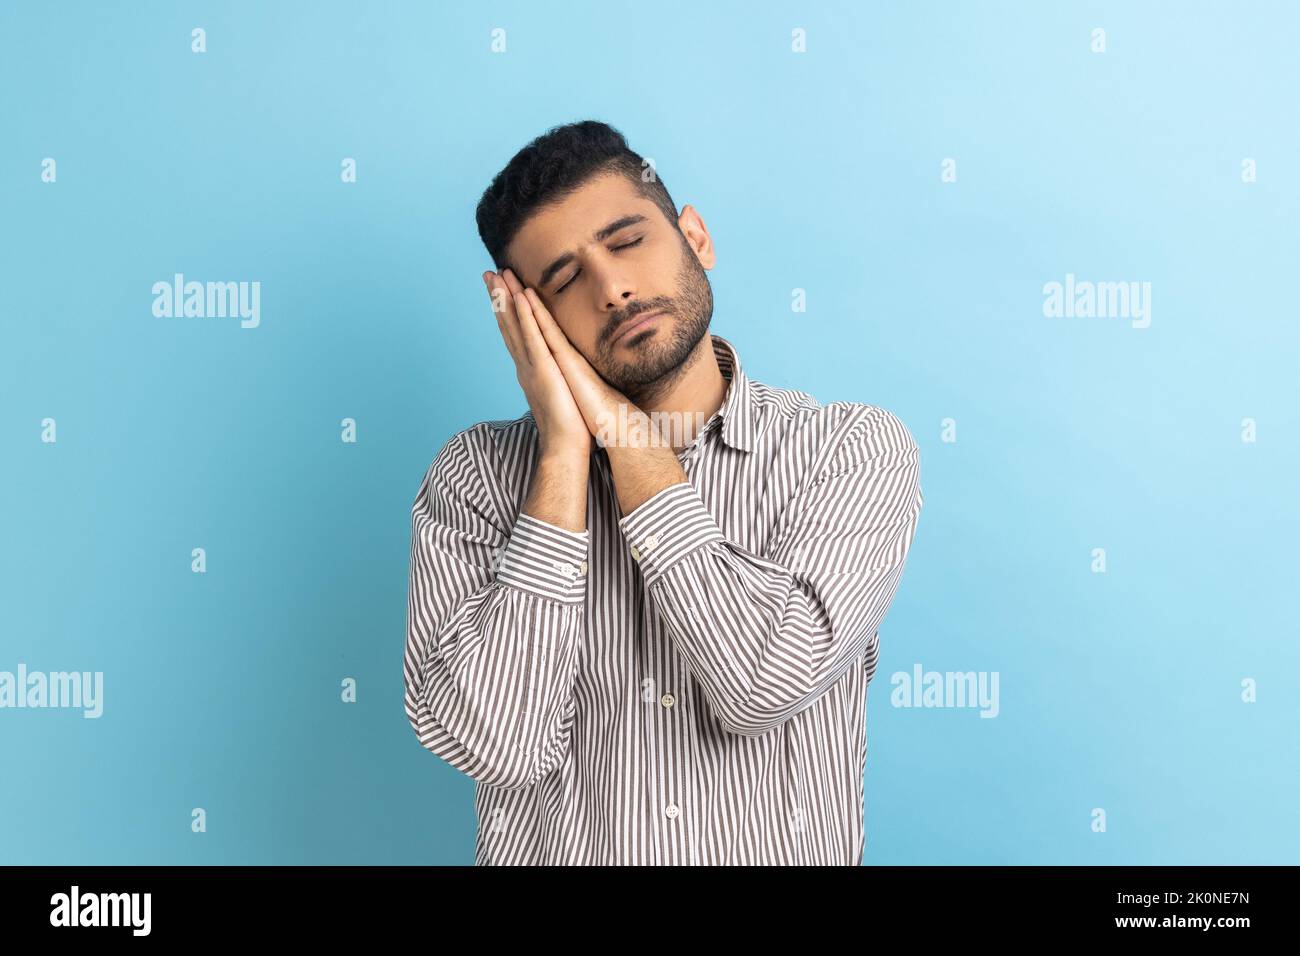 Portrait of handsome bearded man sleeping laying down on her palms, having comfortable nap and resting, dozing off, wearing striped shirt. Indoor studio shot isolated on blue background. Stock Photo